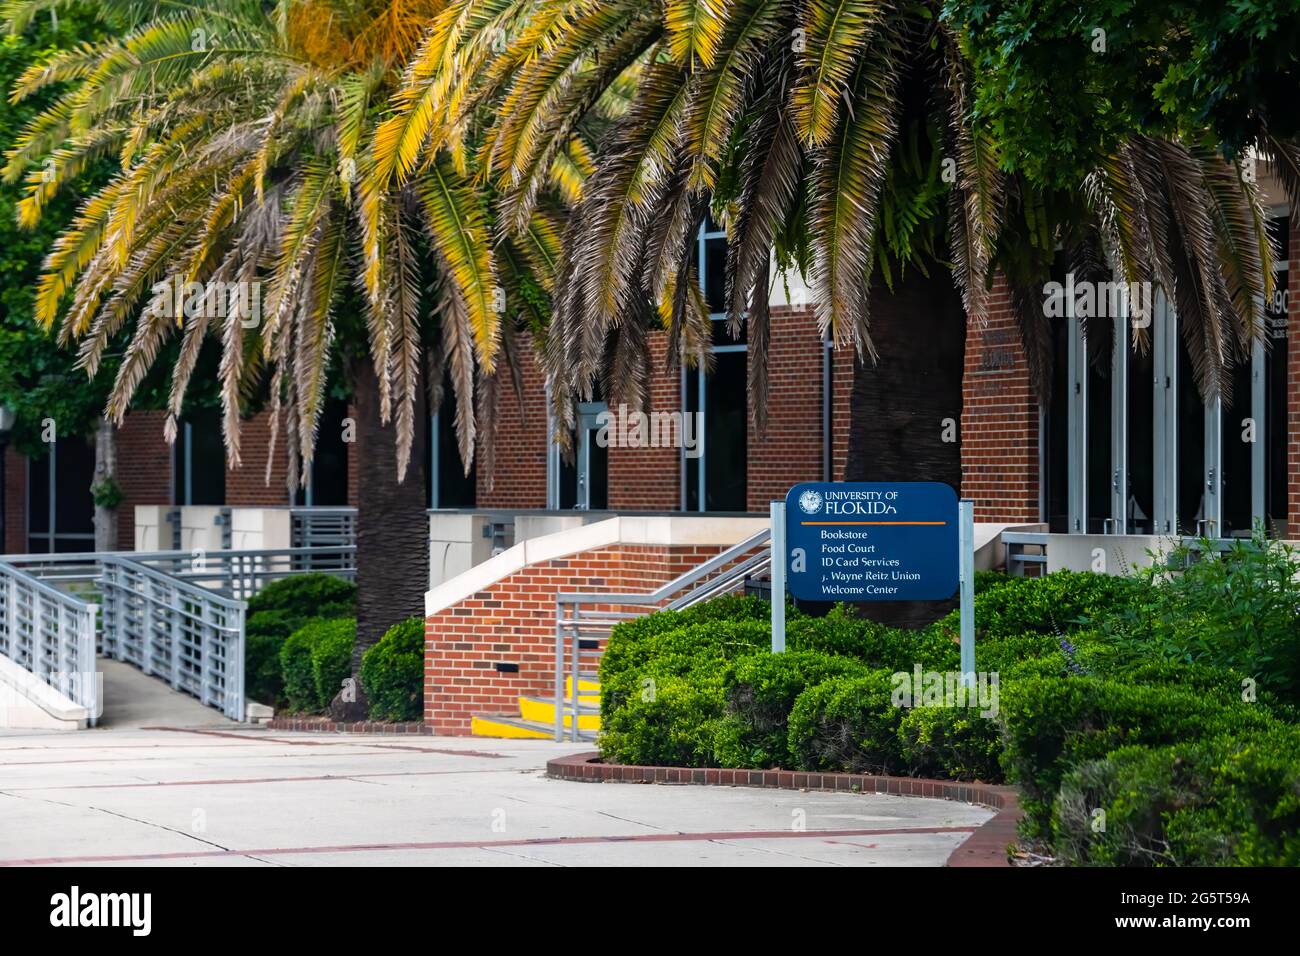 Gainesville, USA - April 27, 2018: University of Florida sign on UF campus with building for bookstore, food court, id card services and welcome cente Stock Photo